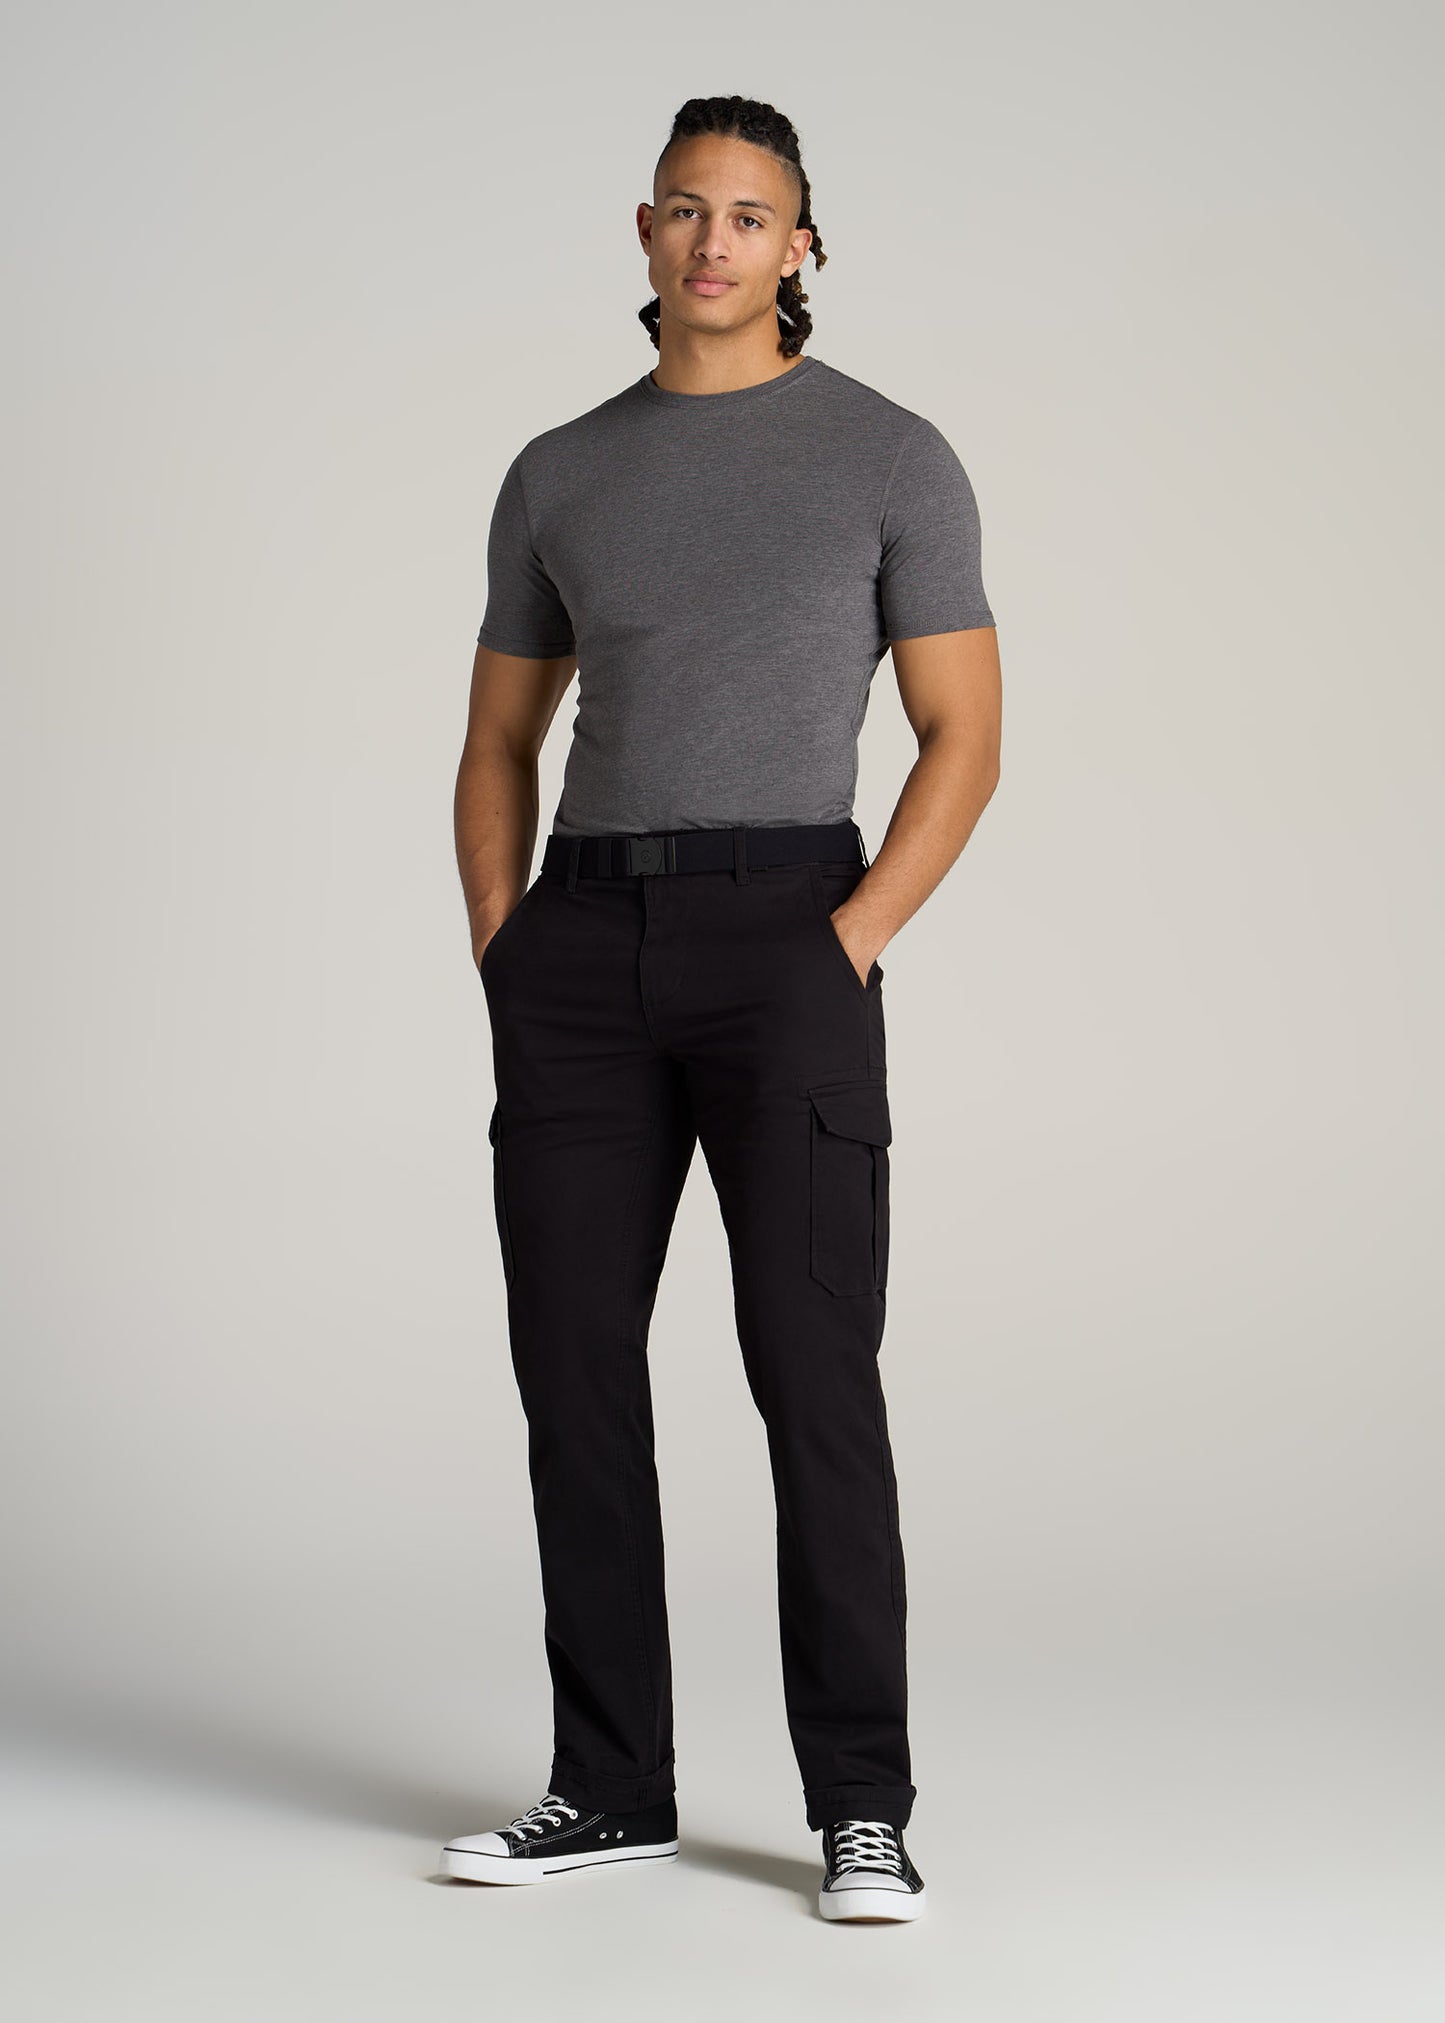    American-Tall-Men-Essential-SLIM-FIT-Crew-Neck-Tees-Charocal-Mix-full